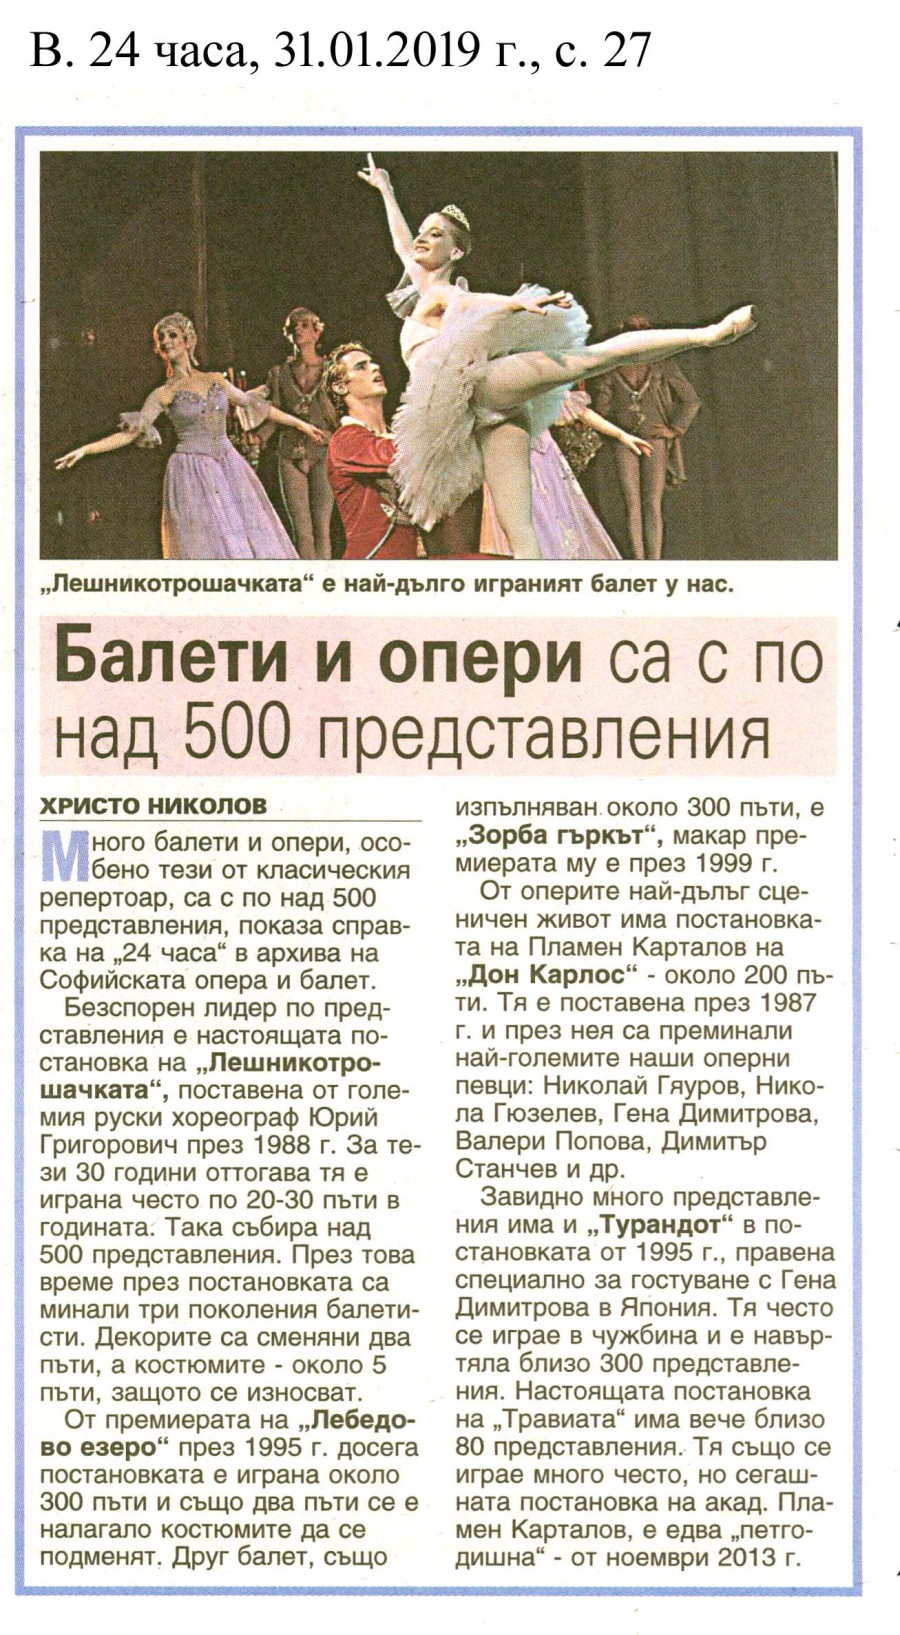 Ballets and operas have more than 500 performances - Newspaper “24 chasa”, 31.01.2019, p. 27